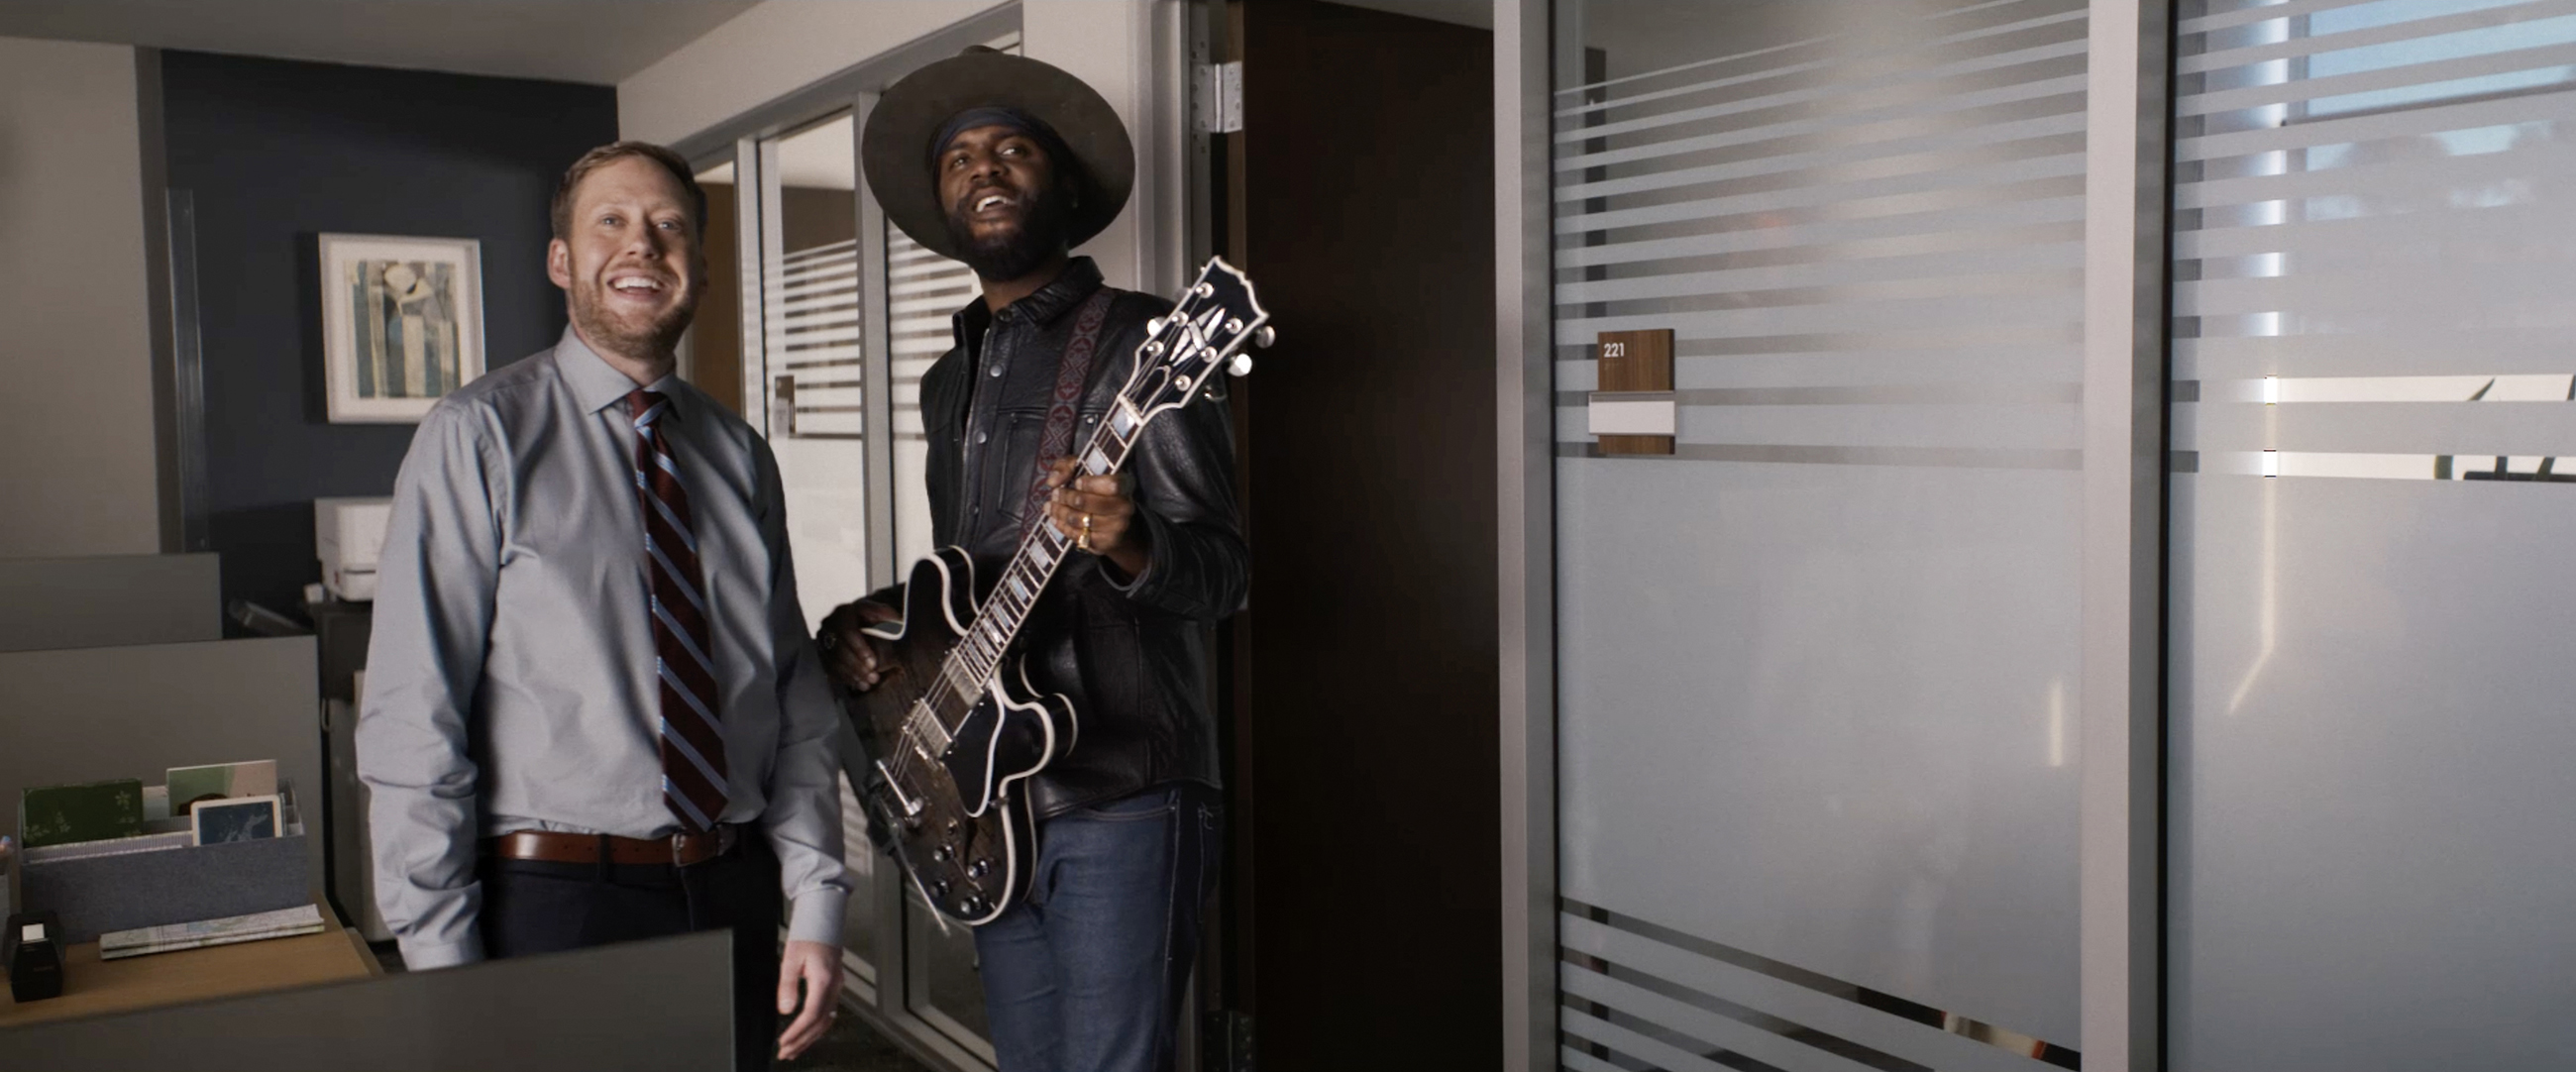 Gary Clark Jr. responds with a knowing nod when a Workmate calls out, "you're a rock star” in the new Workday Big Game commercial. Courtesy: Workday